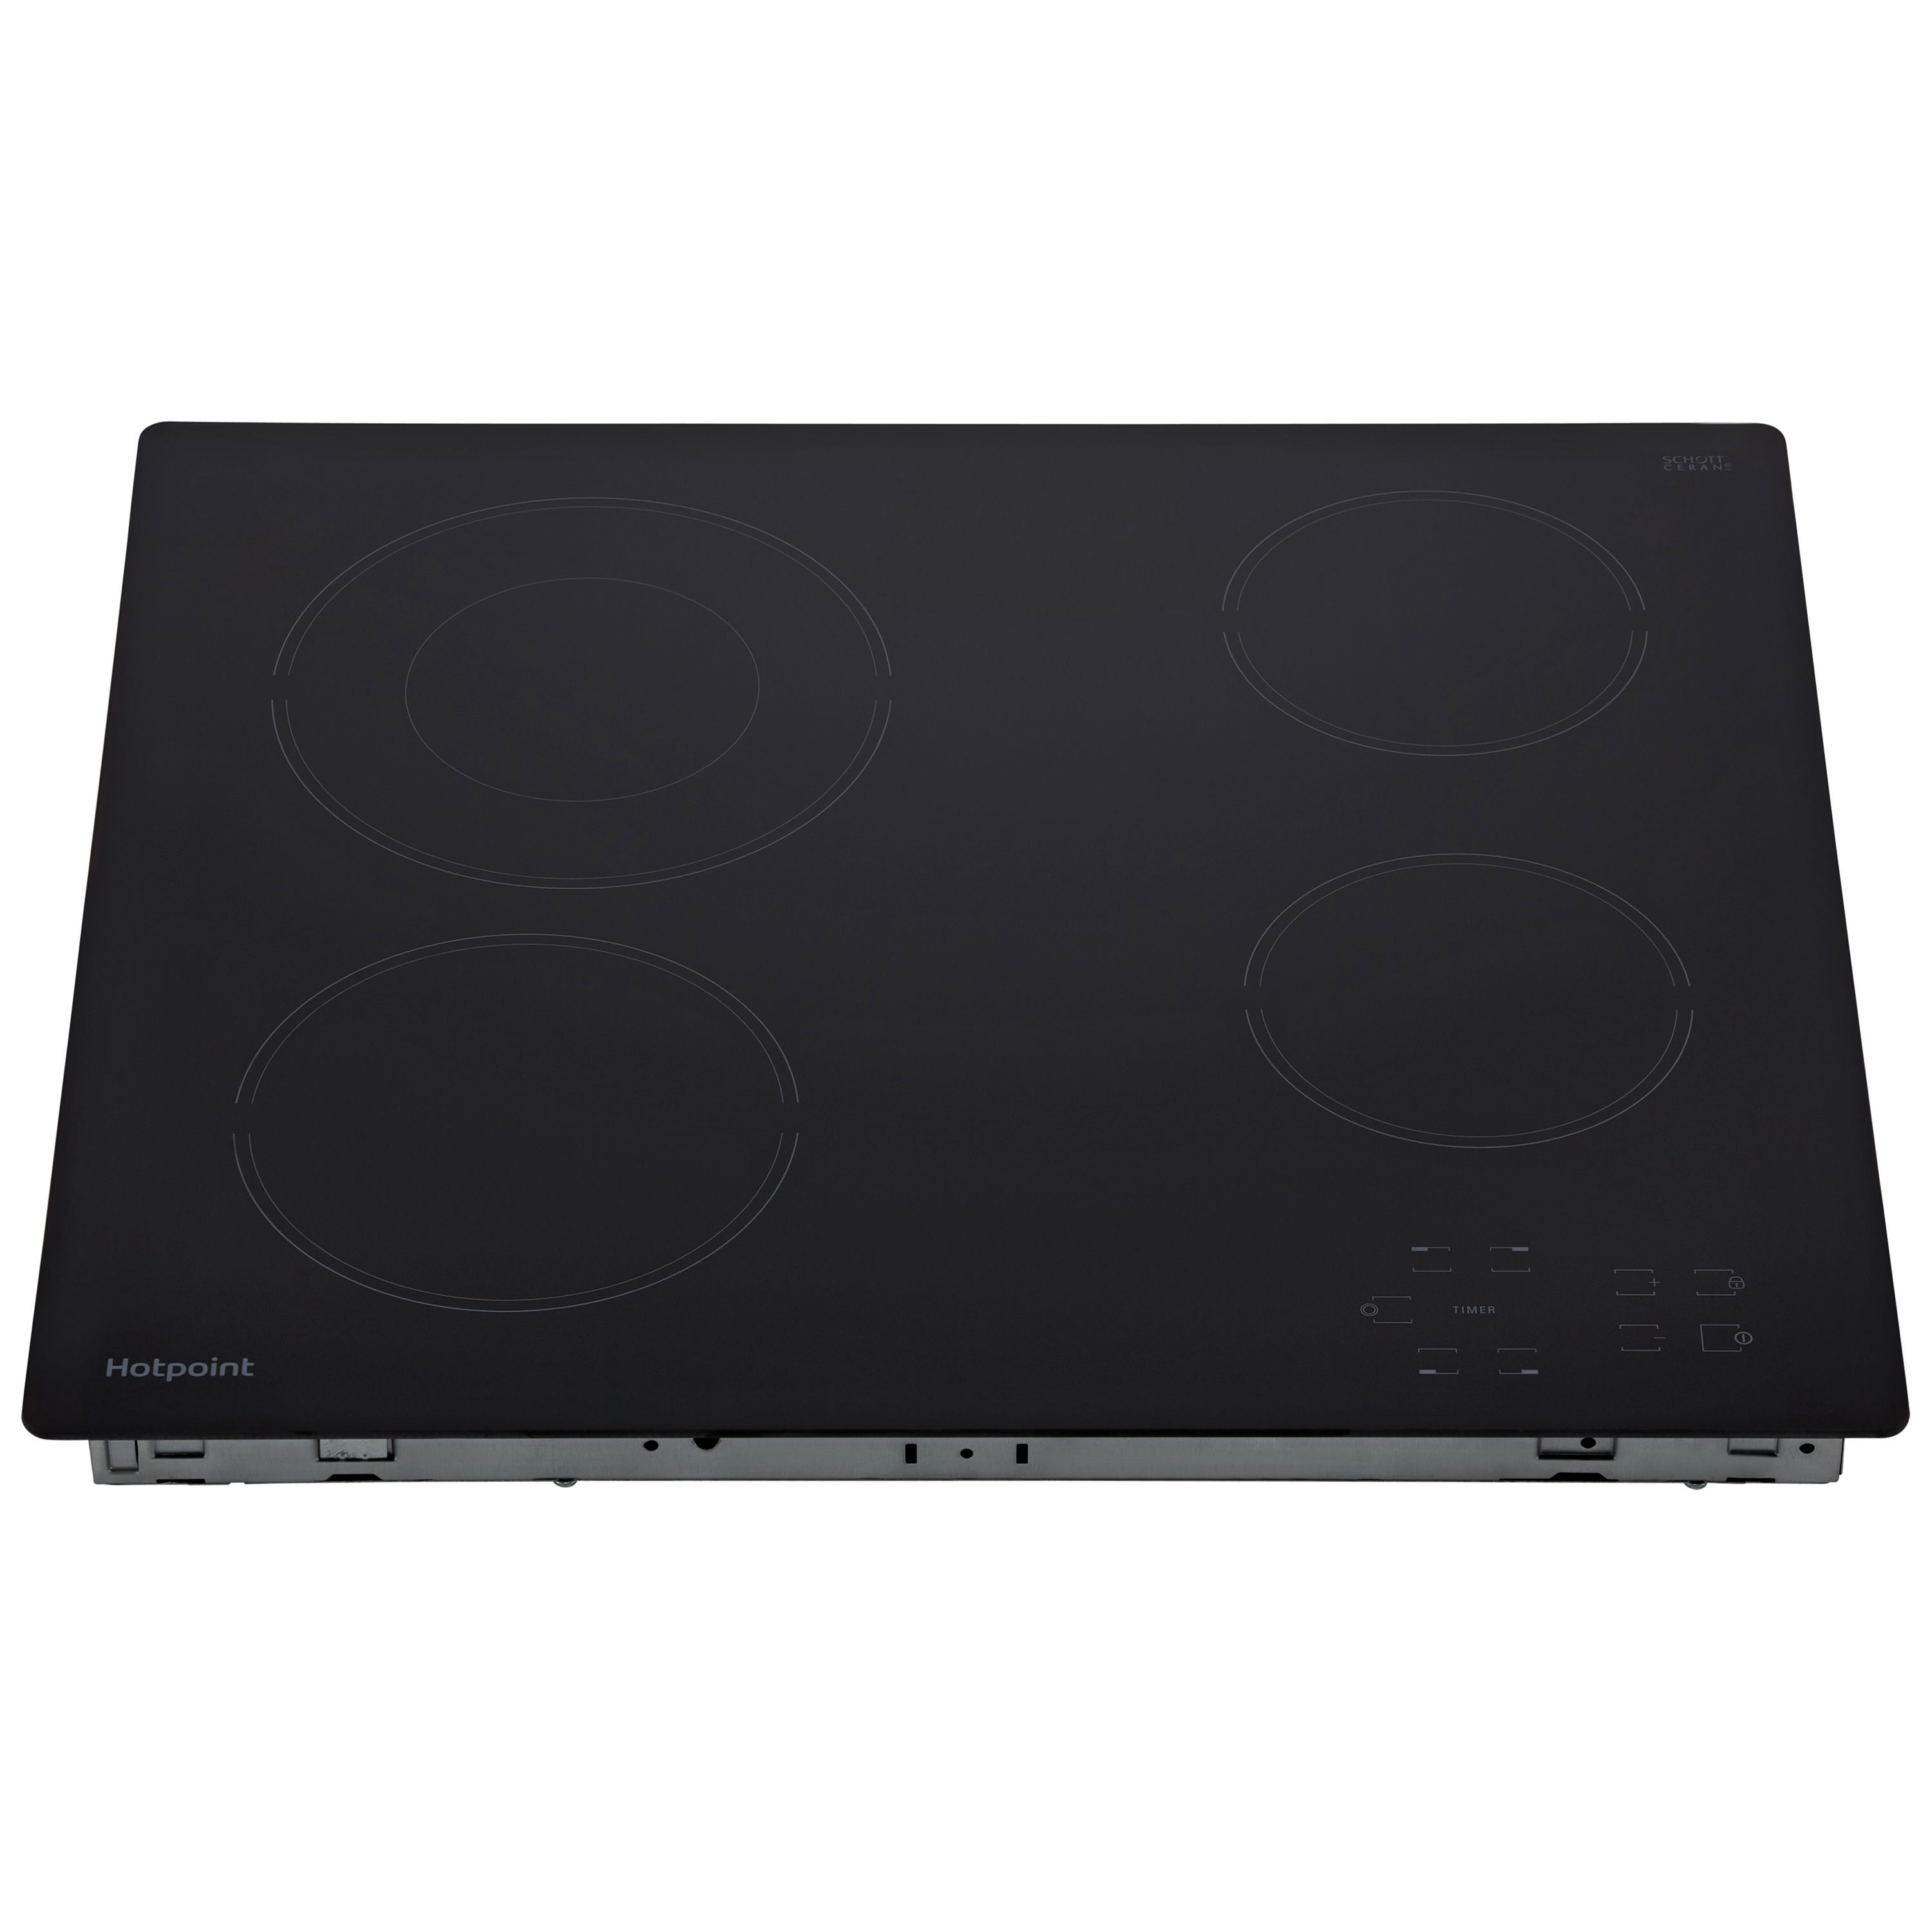 Hotpoint HOTDD2CERAM Built-in Double Oven & ceramic hob pack - Stainless steel